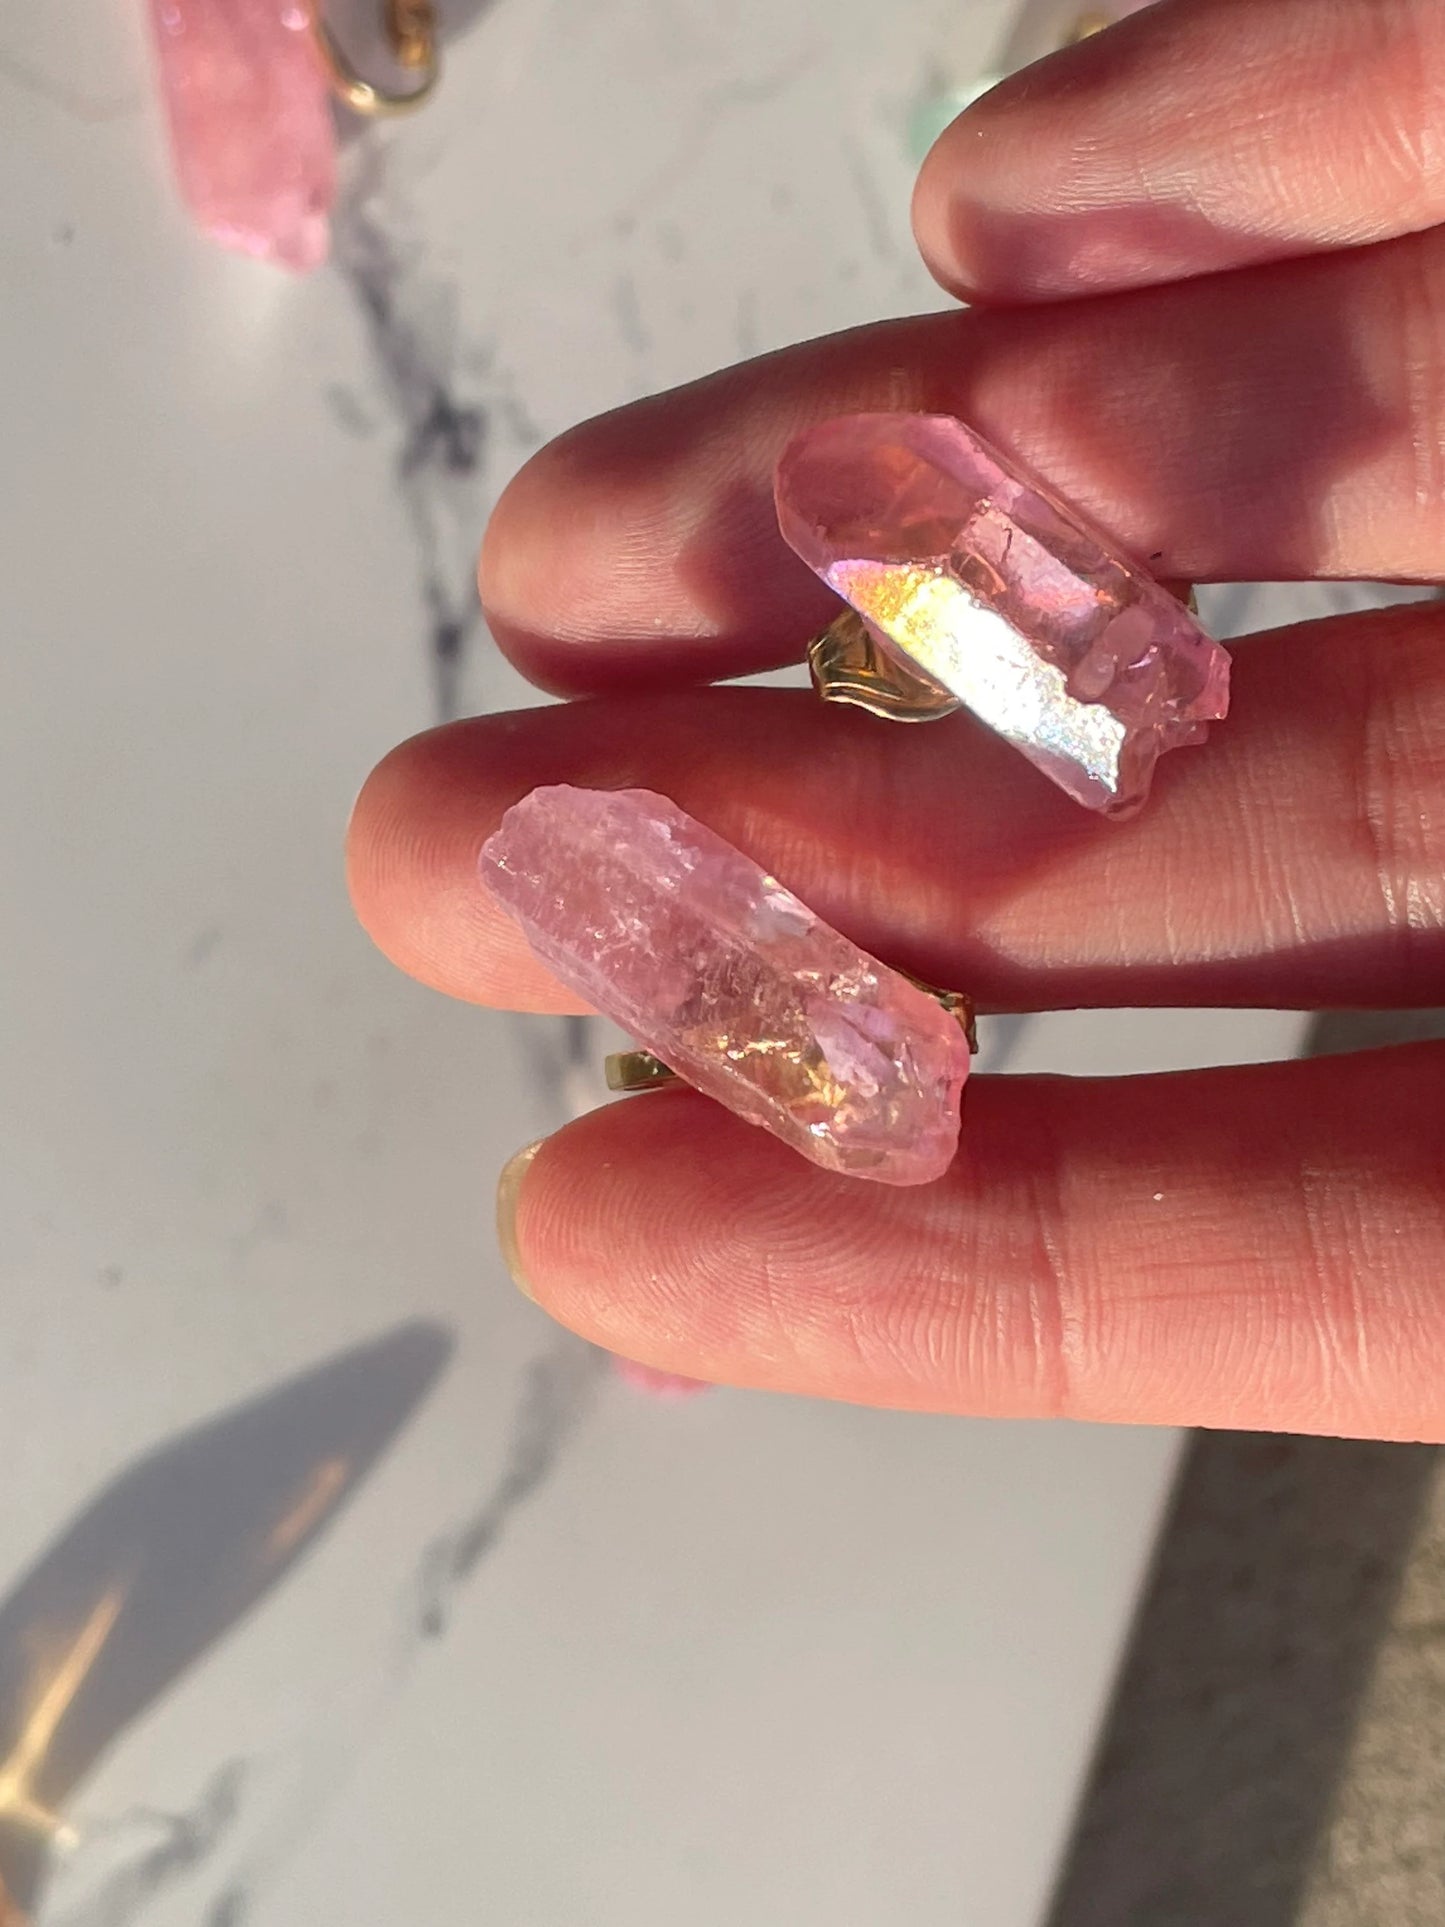 Symmetric or Asymmetric Colorful Quartz and Amethyst Clip-On Earrings or Post Earrings (Nickel Free, Solid Sterling, Gold Filled)